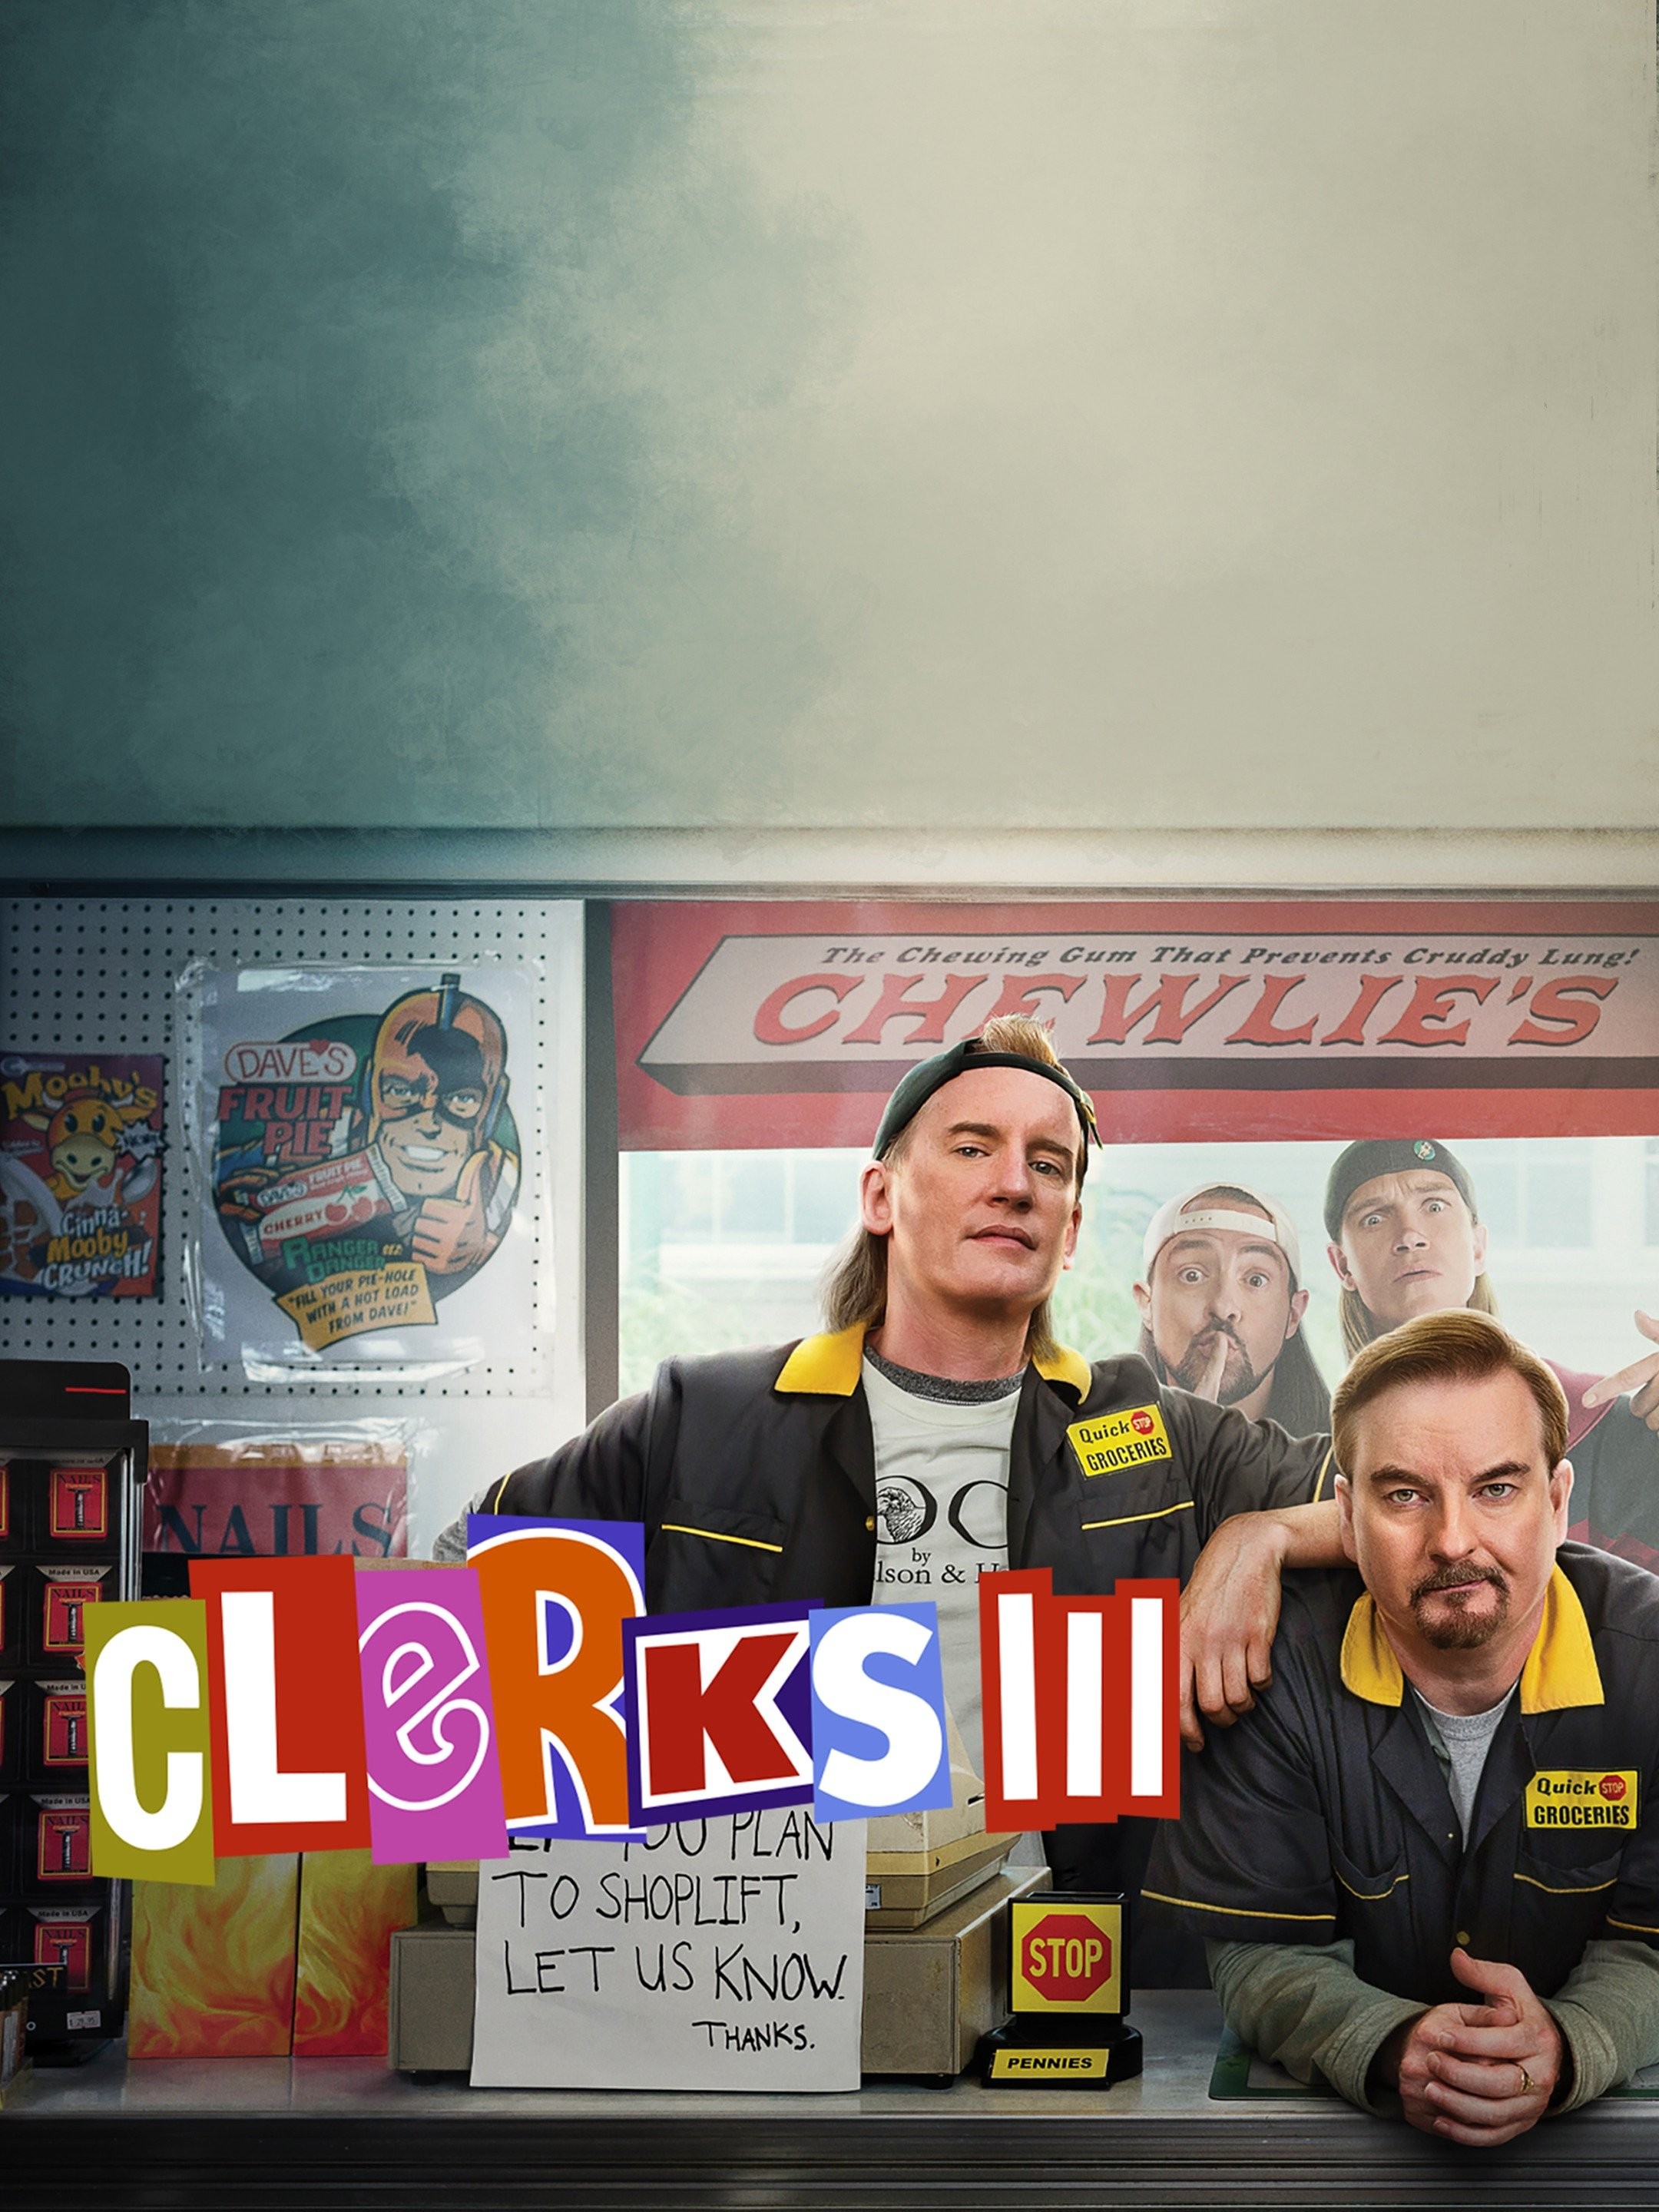 Clerks 3' Trailer: Kevin Smith's Classic Series Gets First Look